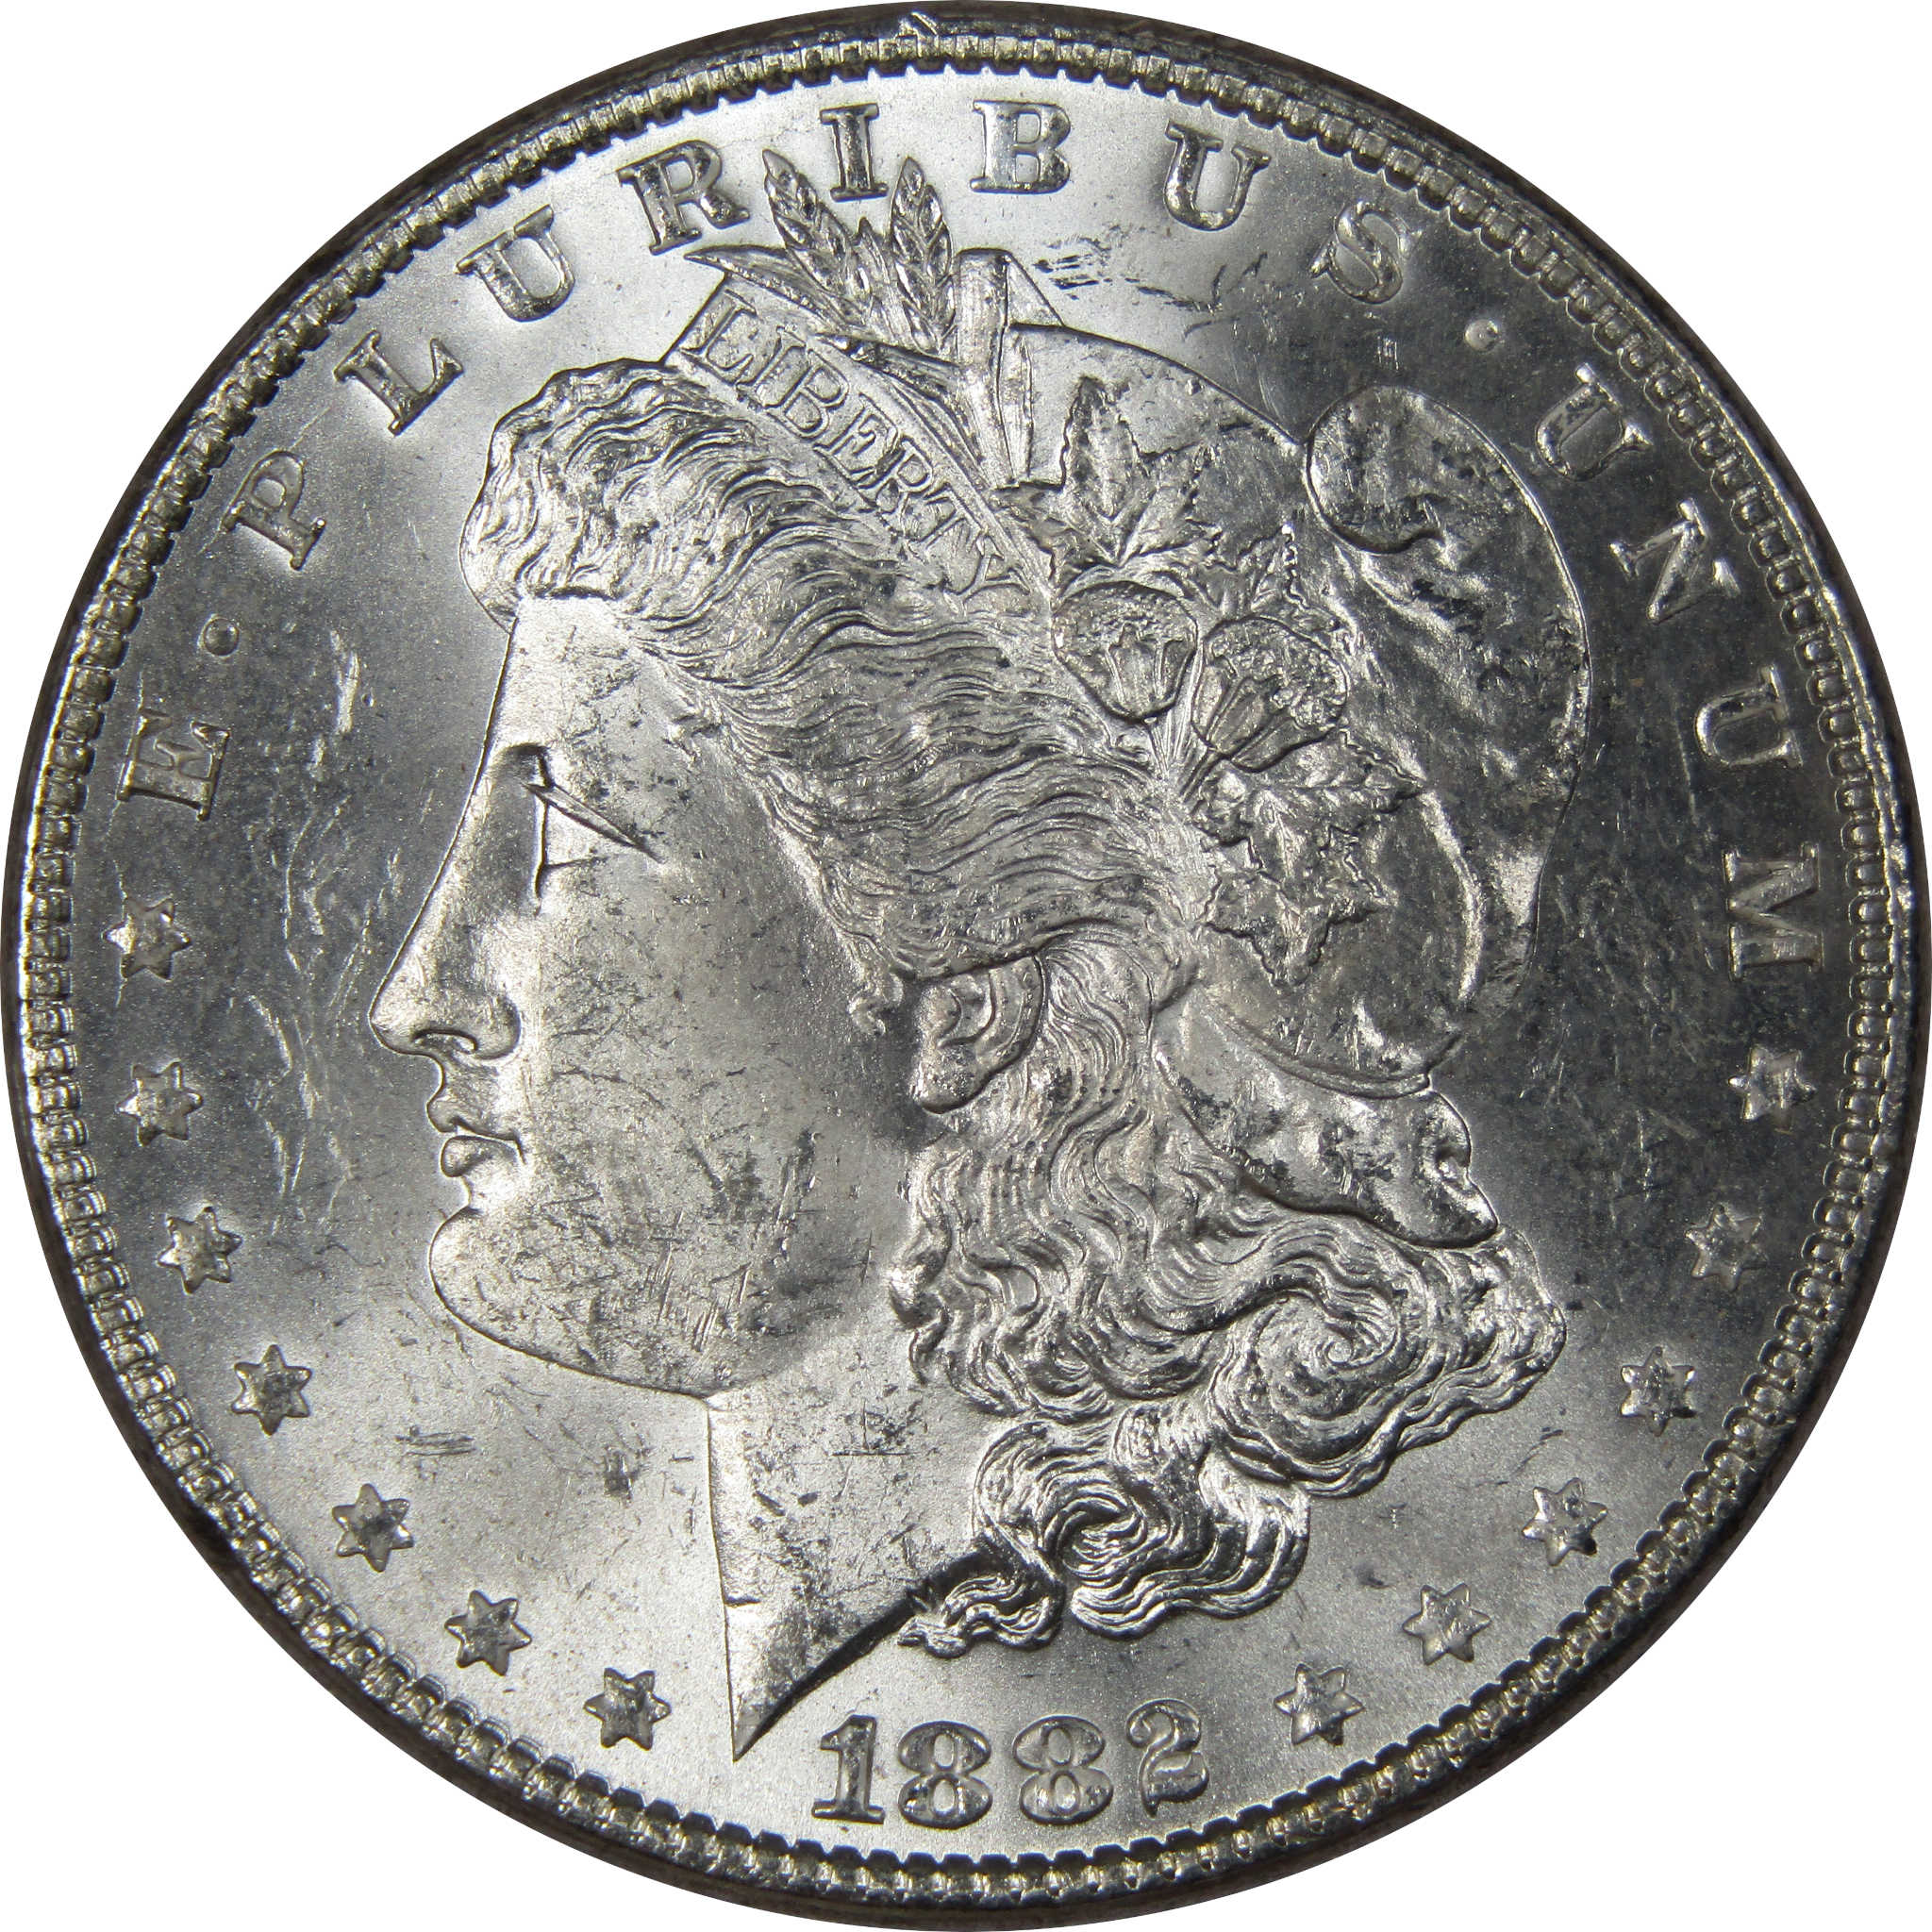 1882 Morgan Dollar BU Uncirculated Mint State 90% Silver SKU:IPC9667 - Morgan coin - Morgan silver dollar - Morgan silver dollar for sale - Profile Coins &amp; Collectibles